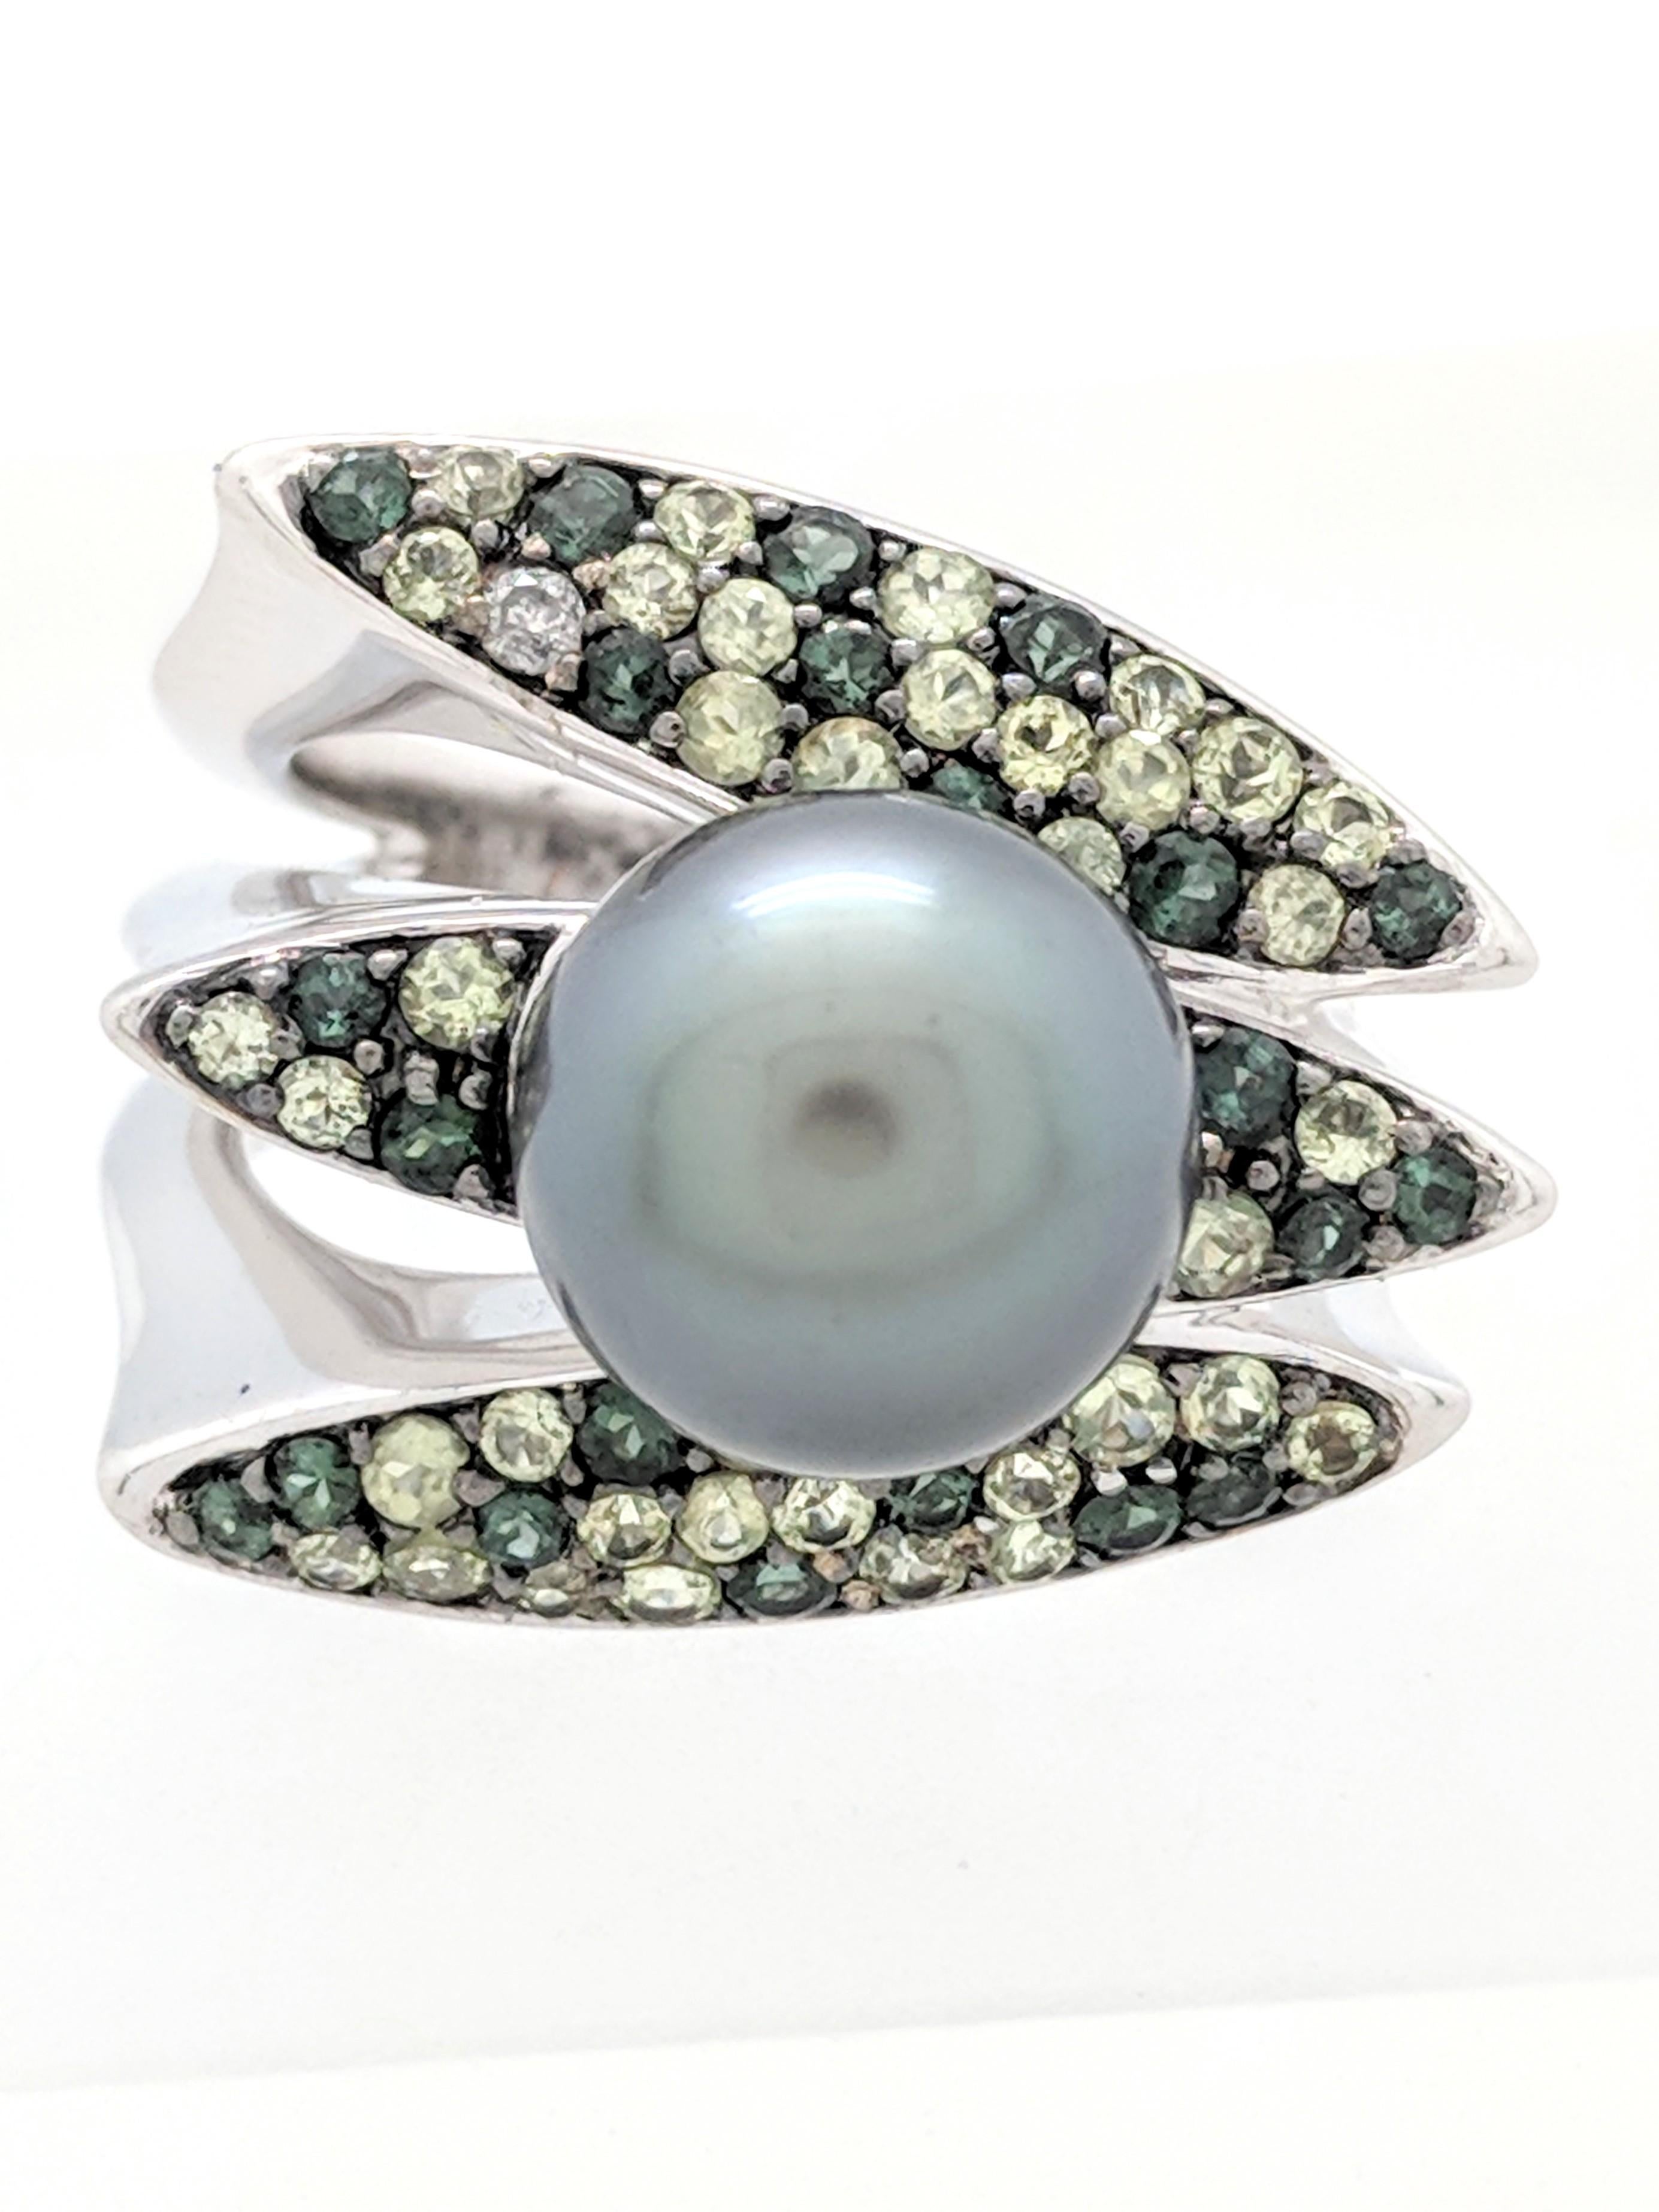 You are viewing a unique Tahitian pearl, peridot & tourmaline ring. This ring is crafted from 14k white gold and weighs 14.3 grams. It features approximately (1) 10mm Tahitian pearl and a variety of different shades of green gemstone, ie peridot,